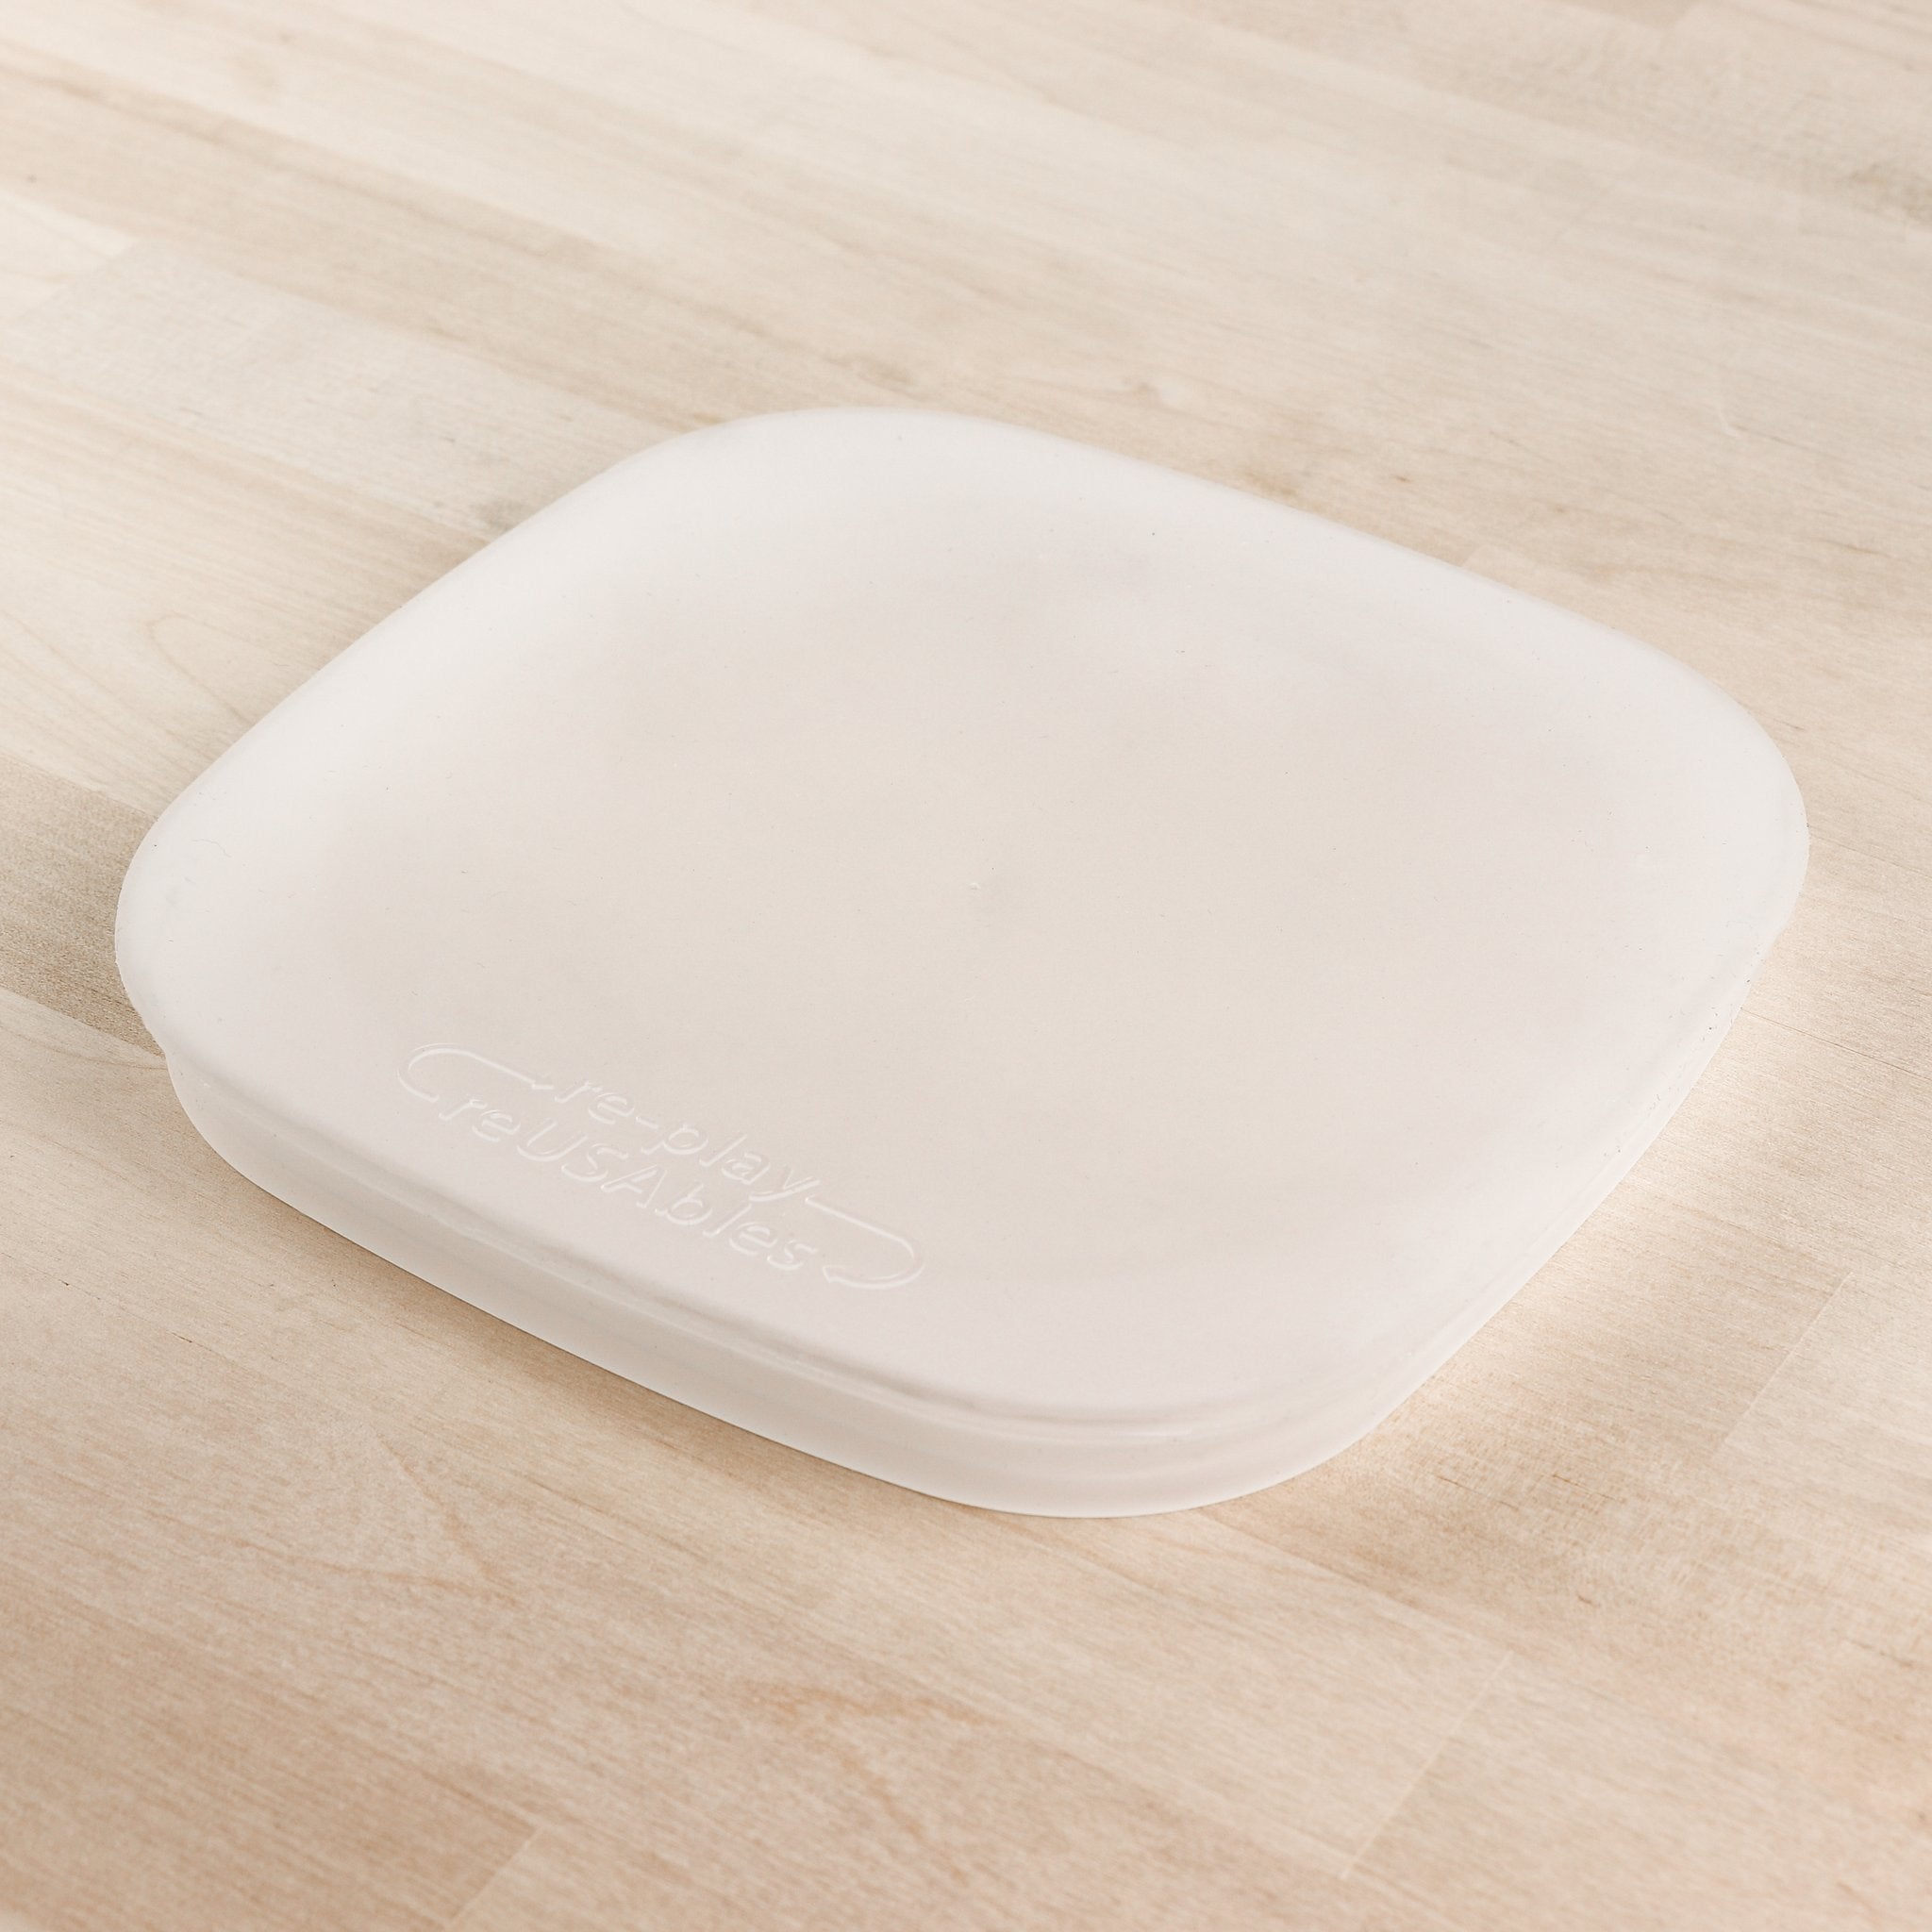 Re-play Silicone Lid-The Living Co.